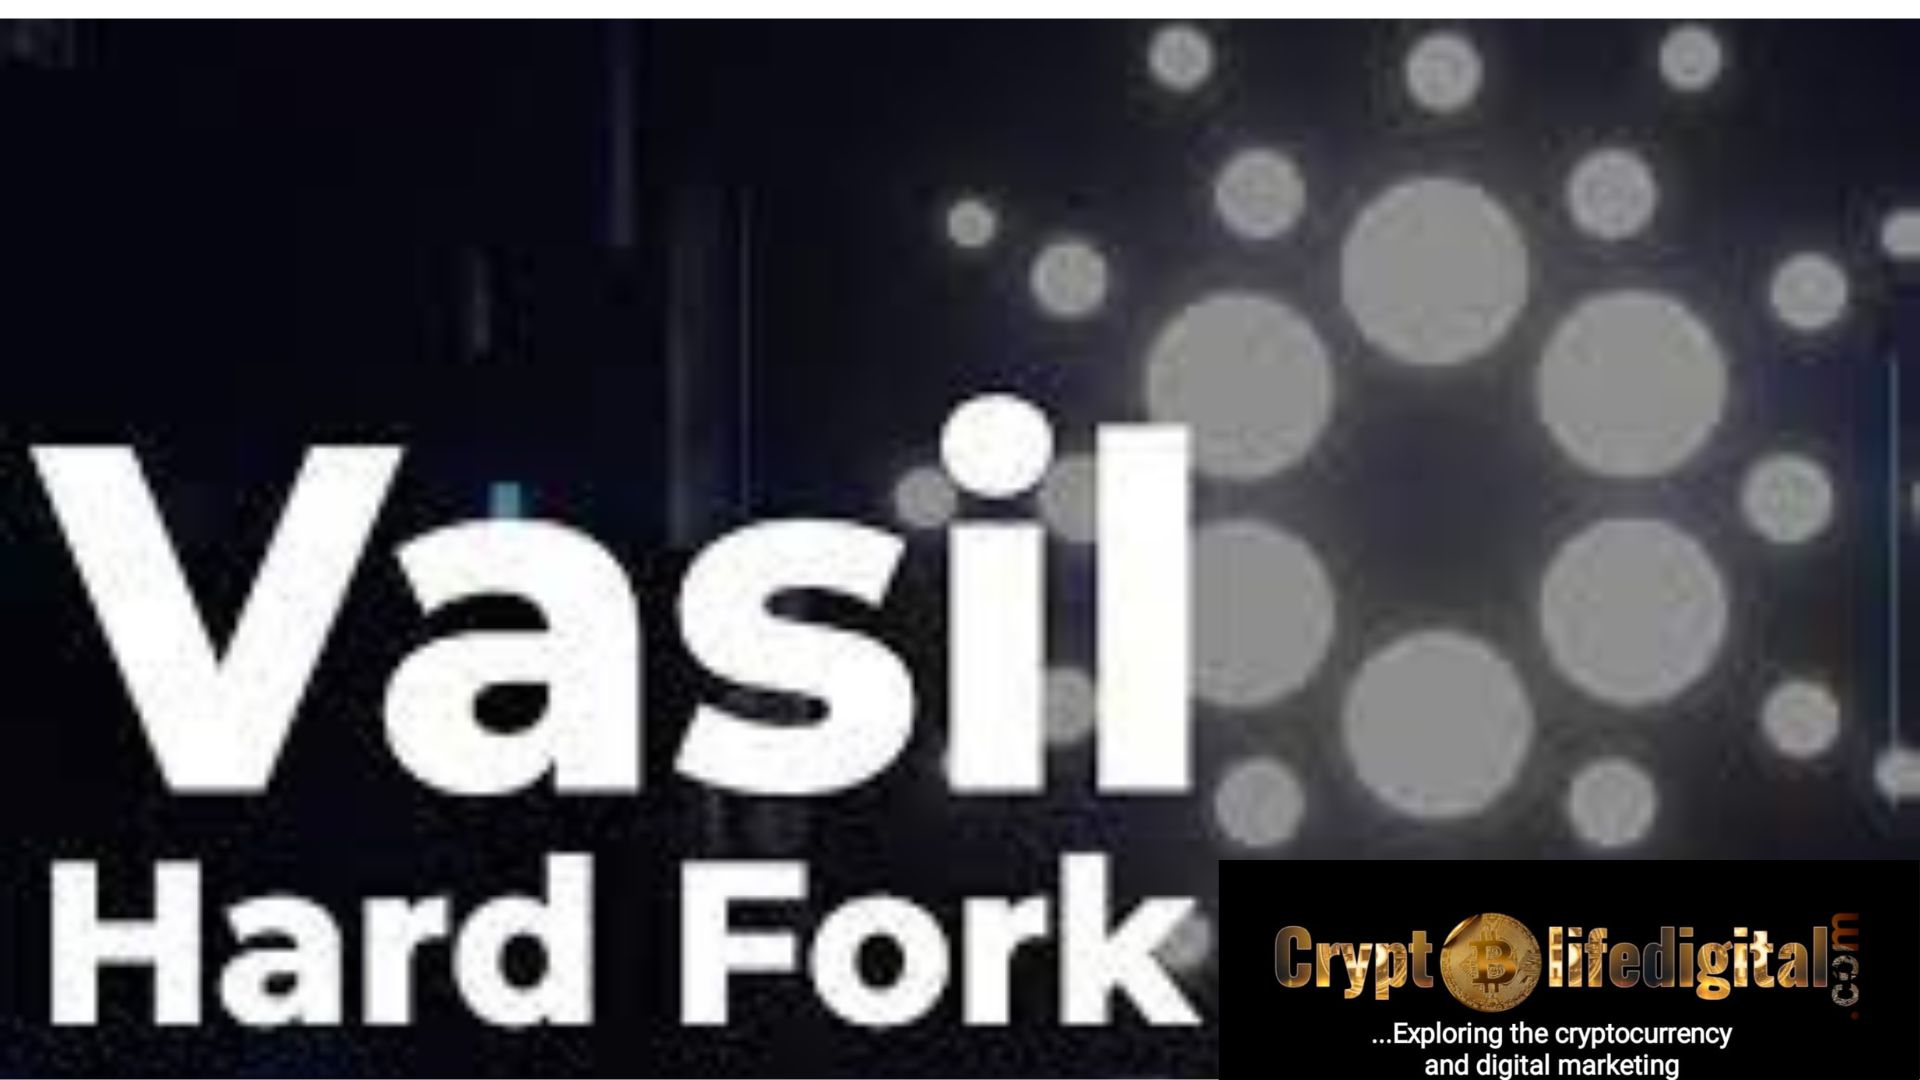 Charles Hoskinson Assures The Users On The Progress Of Vasil Hard Fork “That He Doesn’t Expect Any Further Delay As The Upgrade Is In the Final Stage Of Testing.”